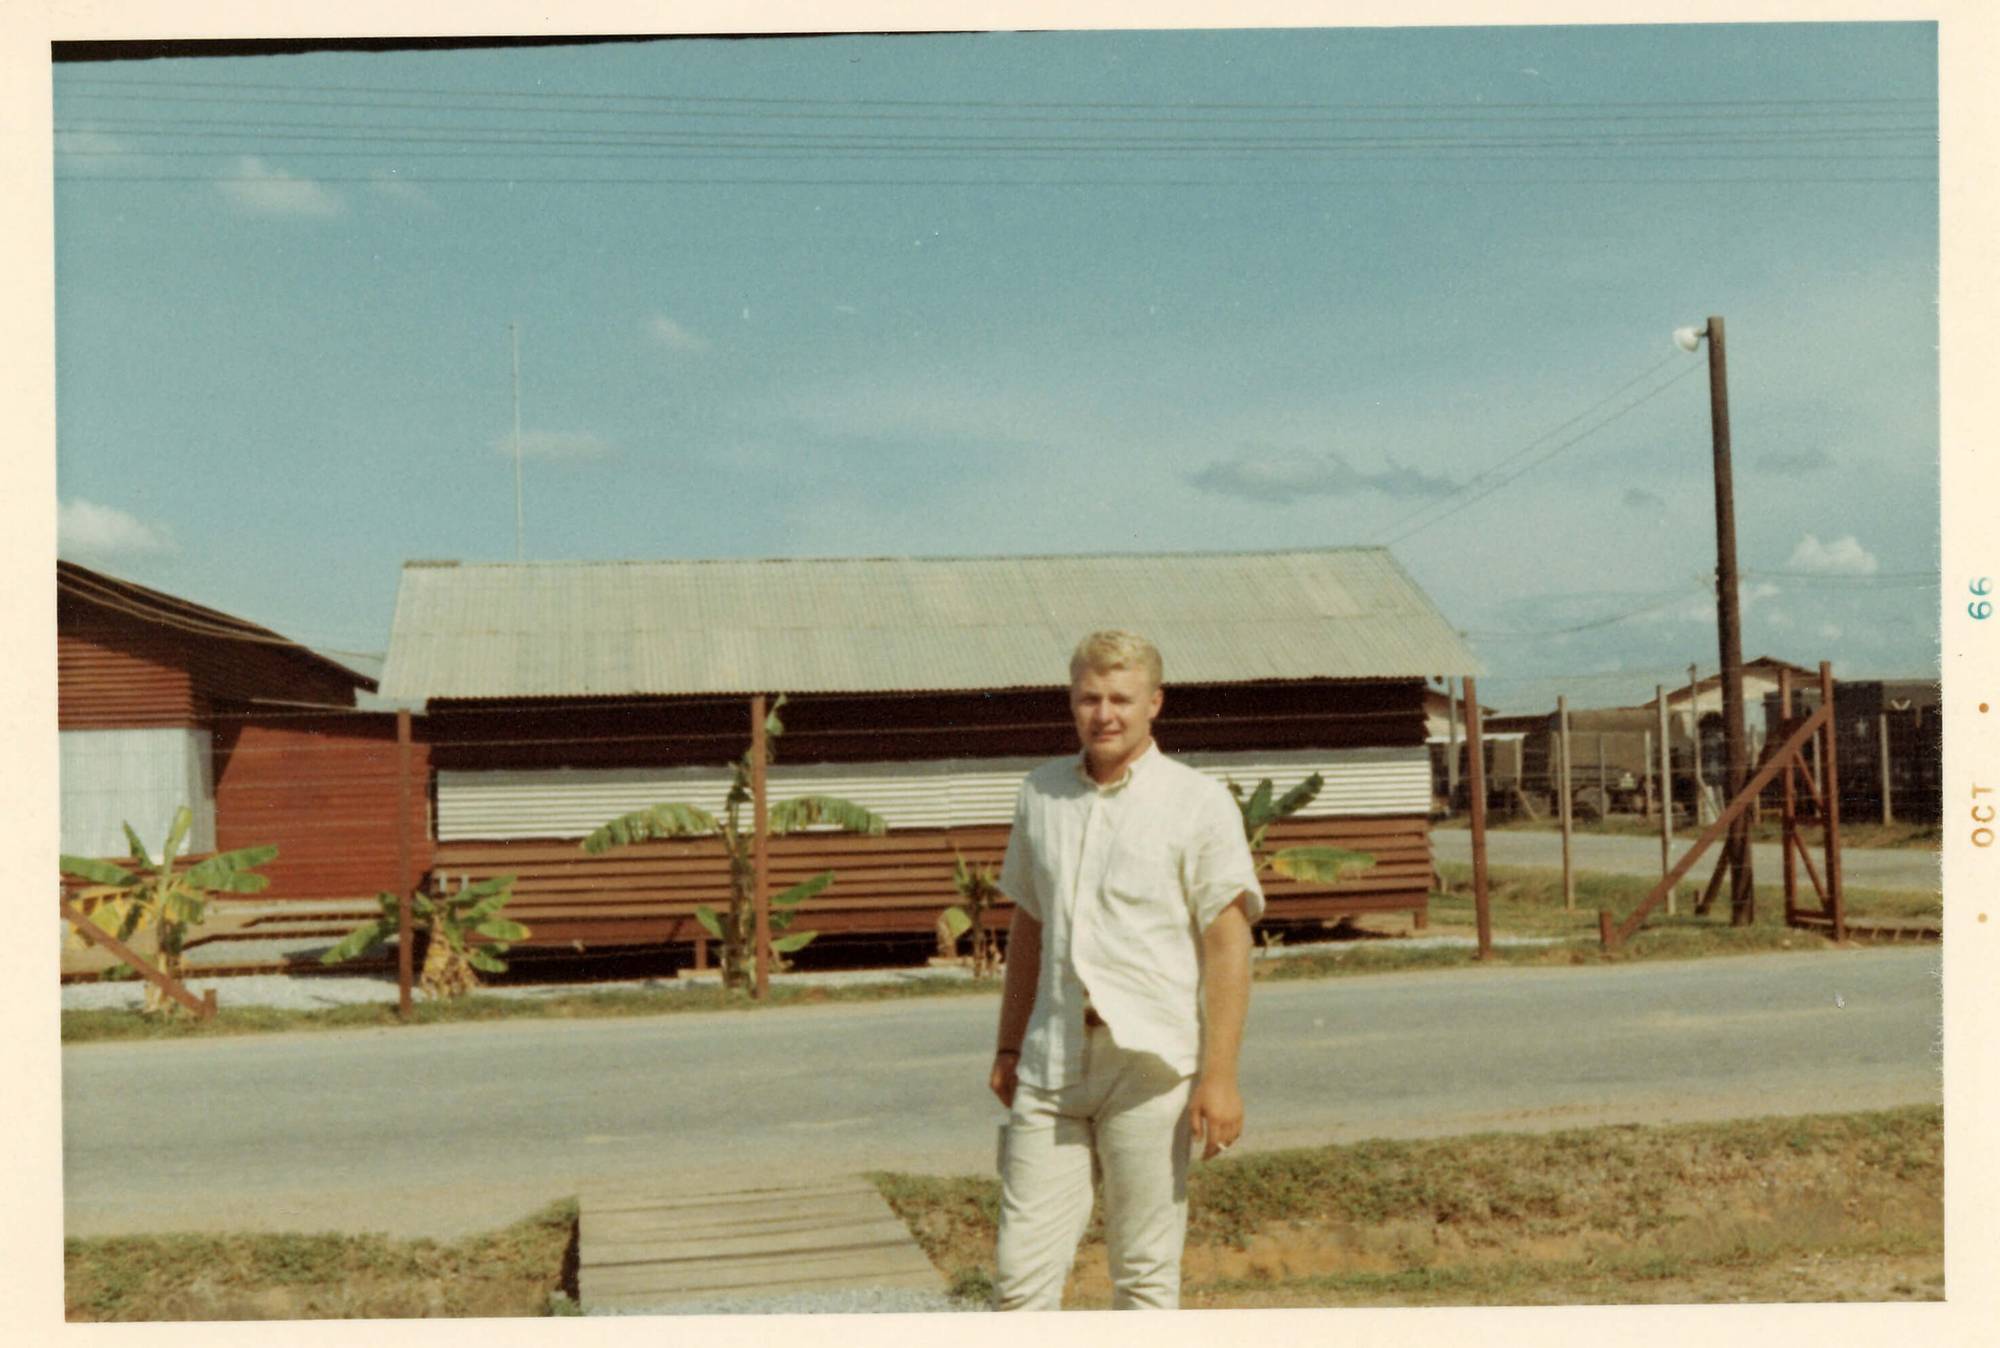 A young man dressed in white, standing outside a corrugated steel building. Margins indicate the photo is from October 1966.